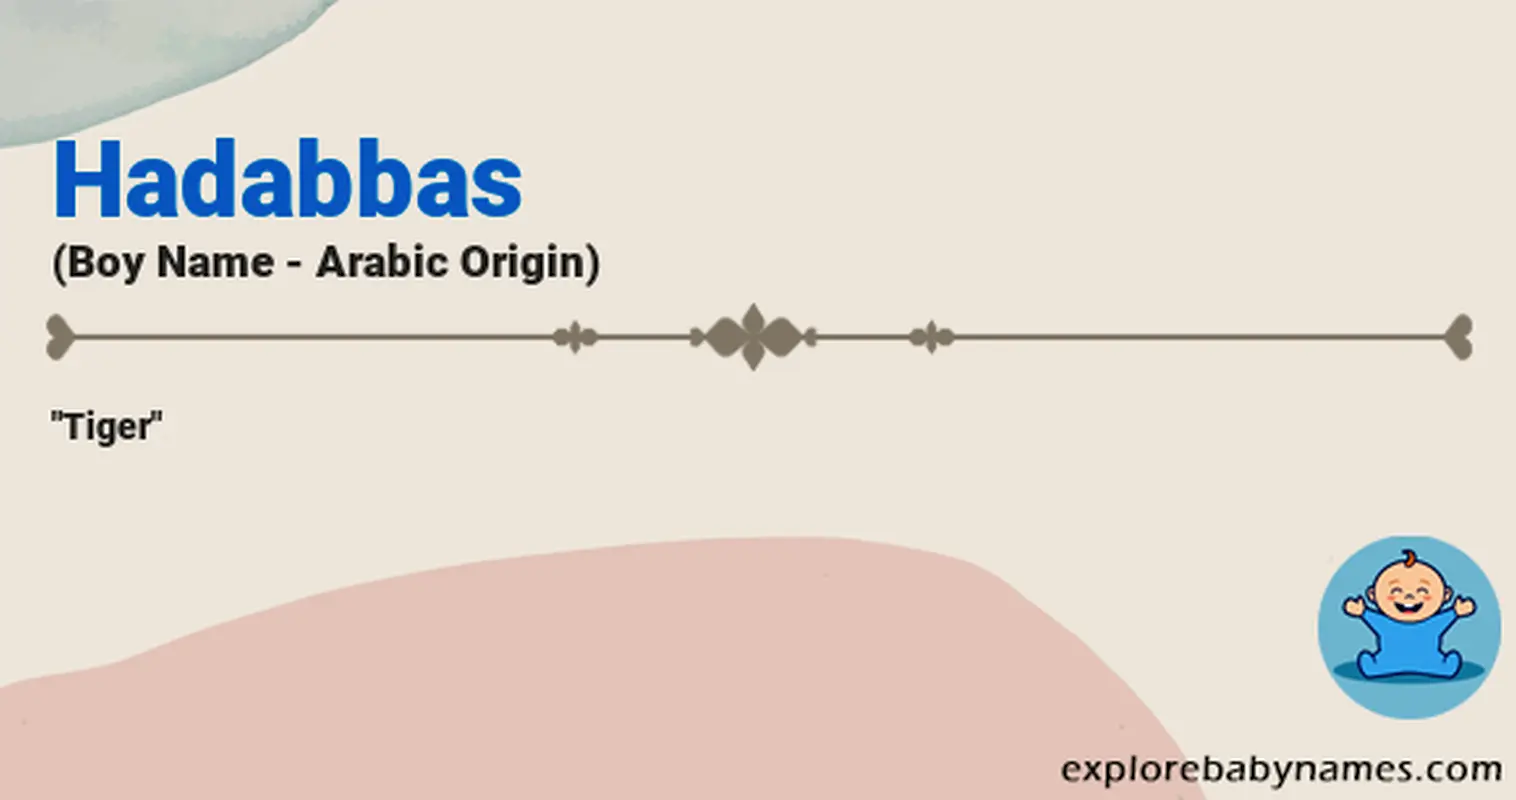 Meaning of Hadabbas